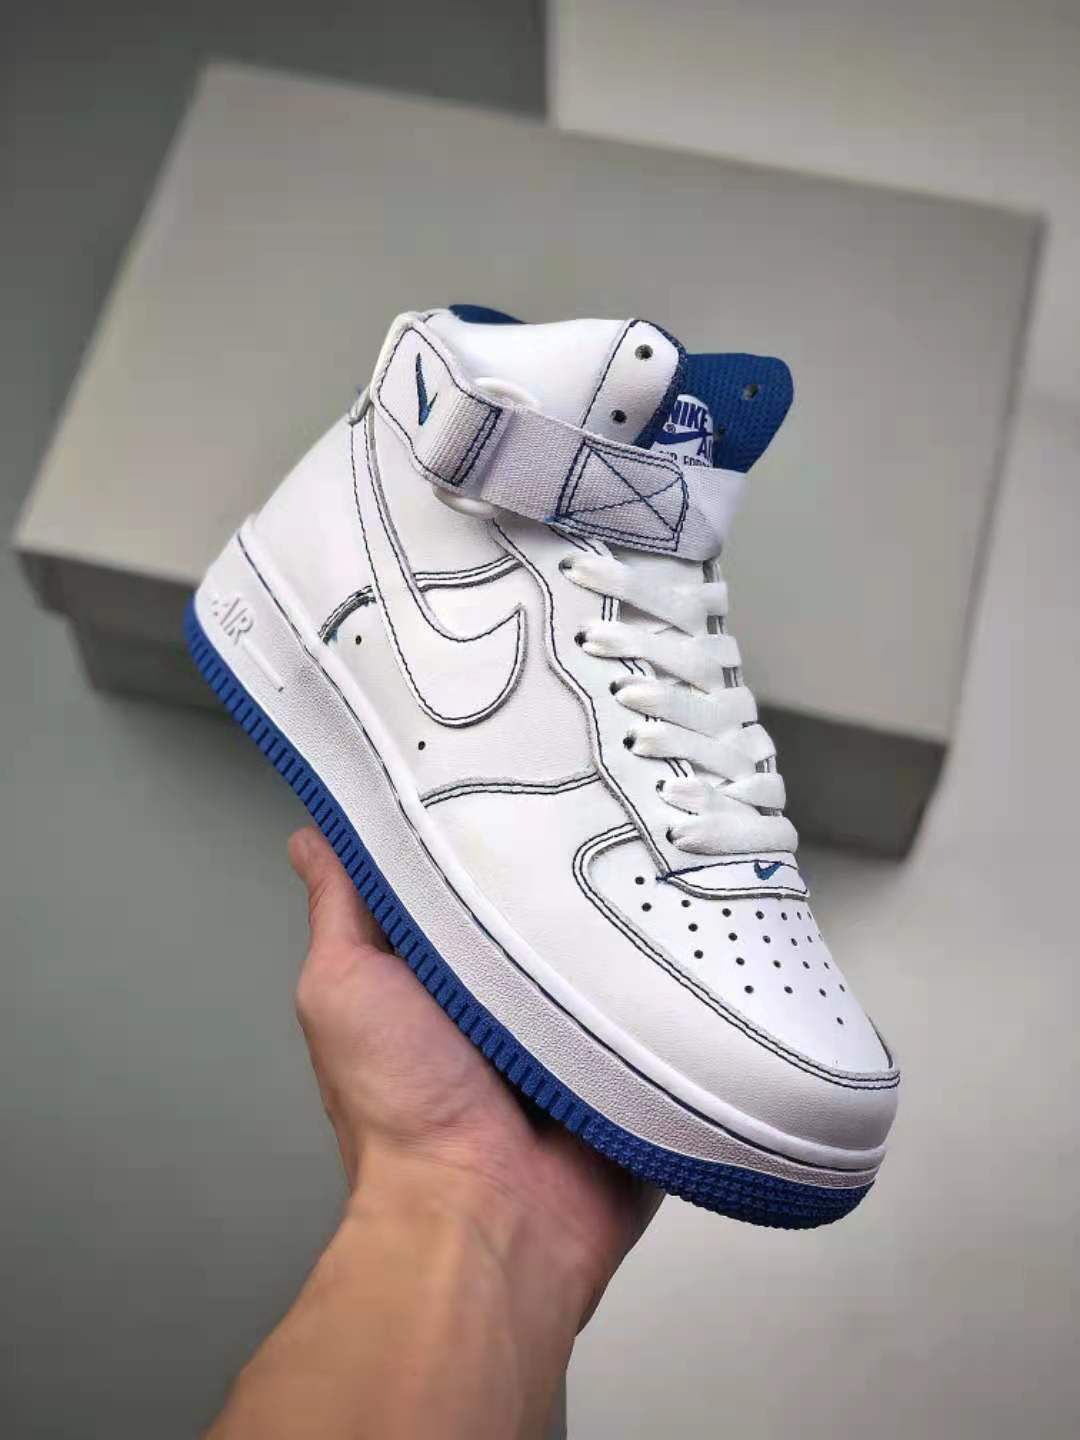 Shop the Nike Air Force 1 High White Royal Blue Contrast Sneakers - CV1753-101